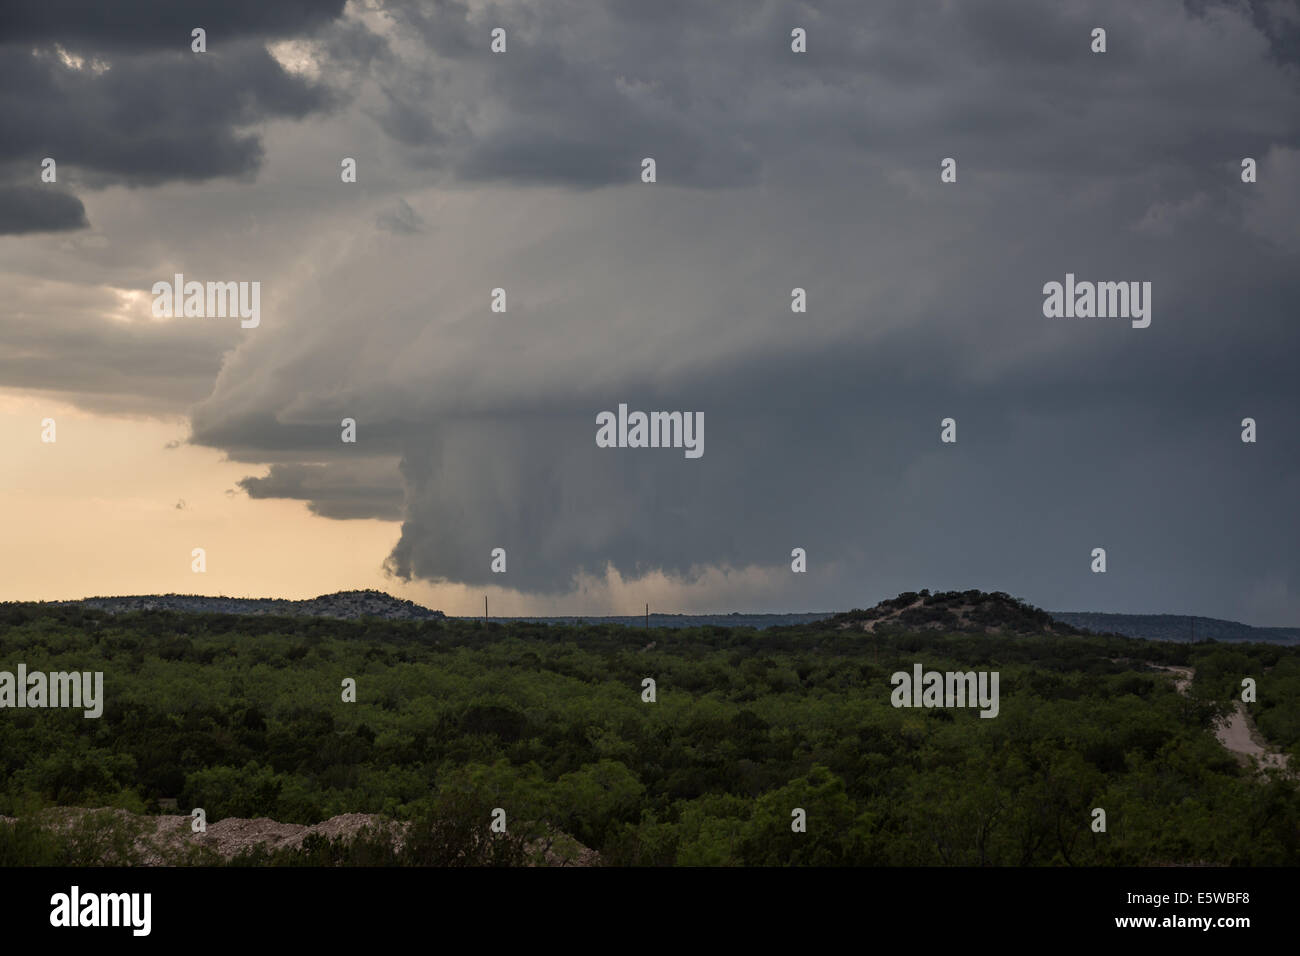 A powerful tornado warned supercell thunderstorm with a large wall cloud dominates the Texas sky while producing severe weather Stock Photo